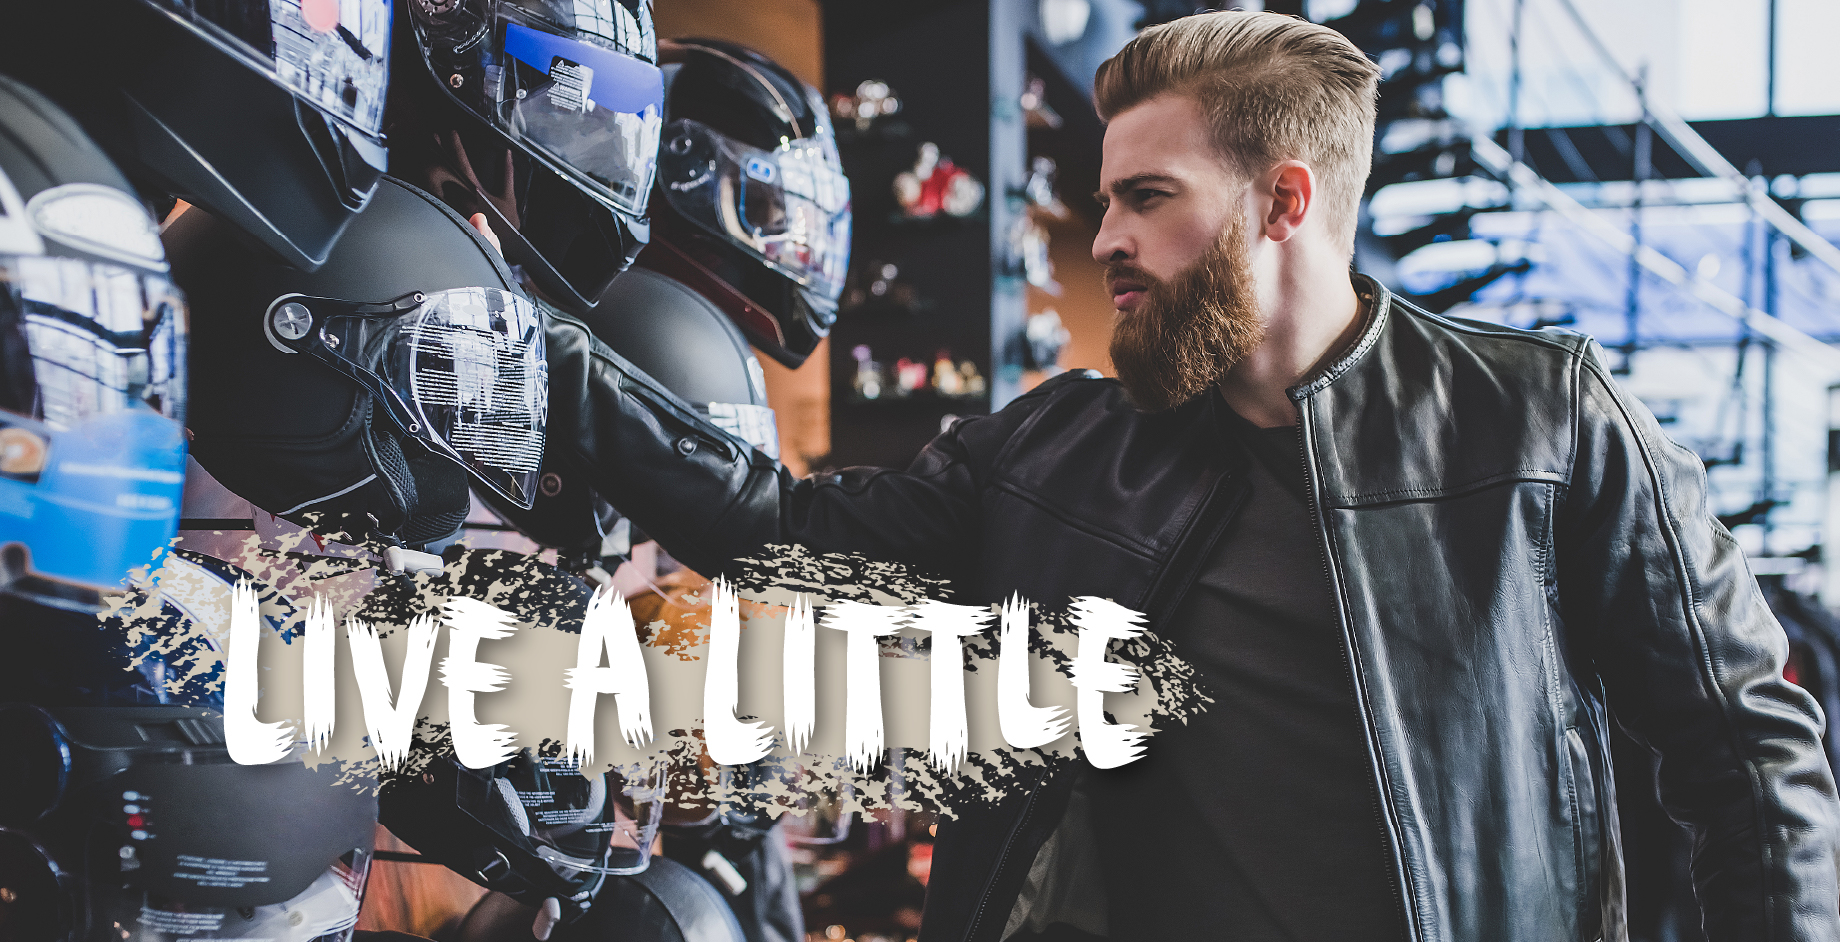 styled man looking at helmets with live a little